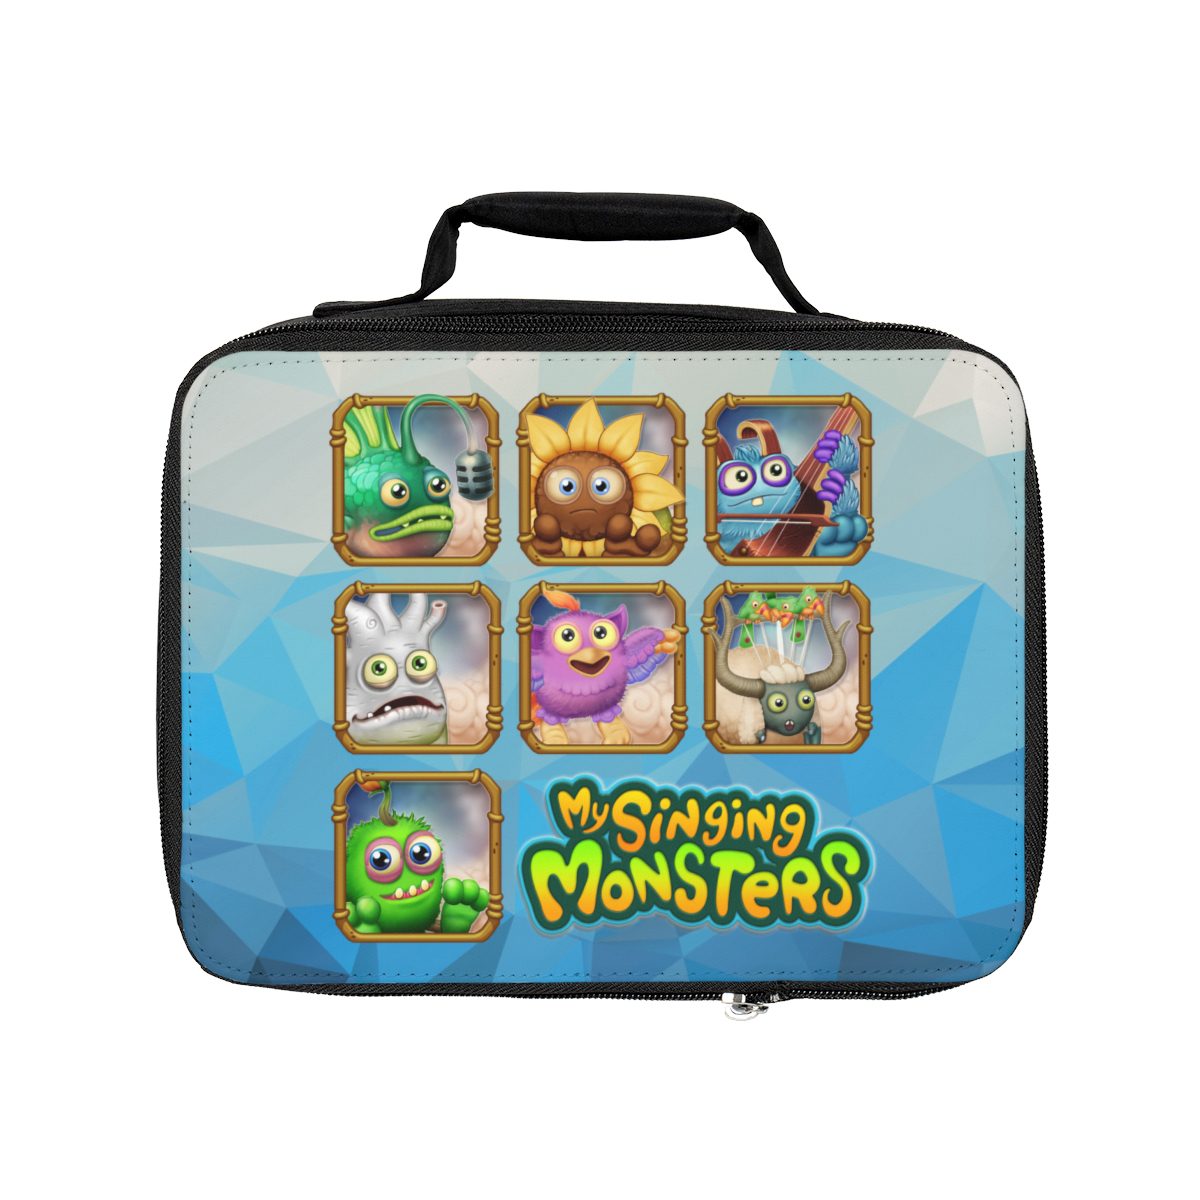 My Singing Monsters Fun Characters Lunch Bag Cool Kiddo 10